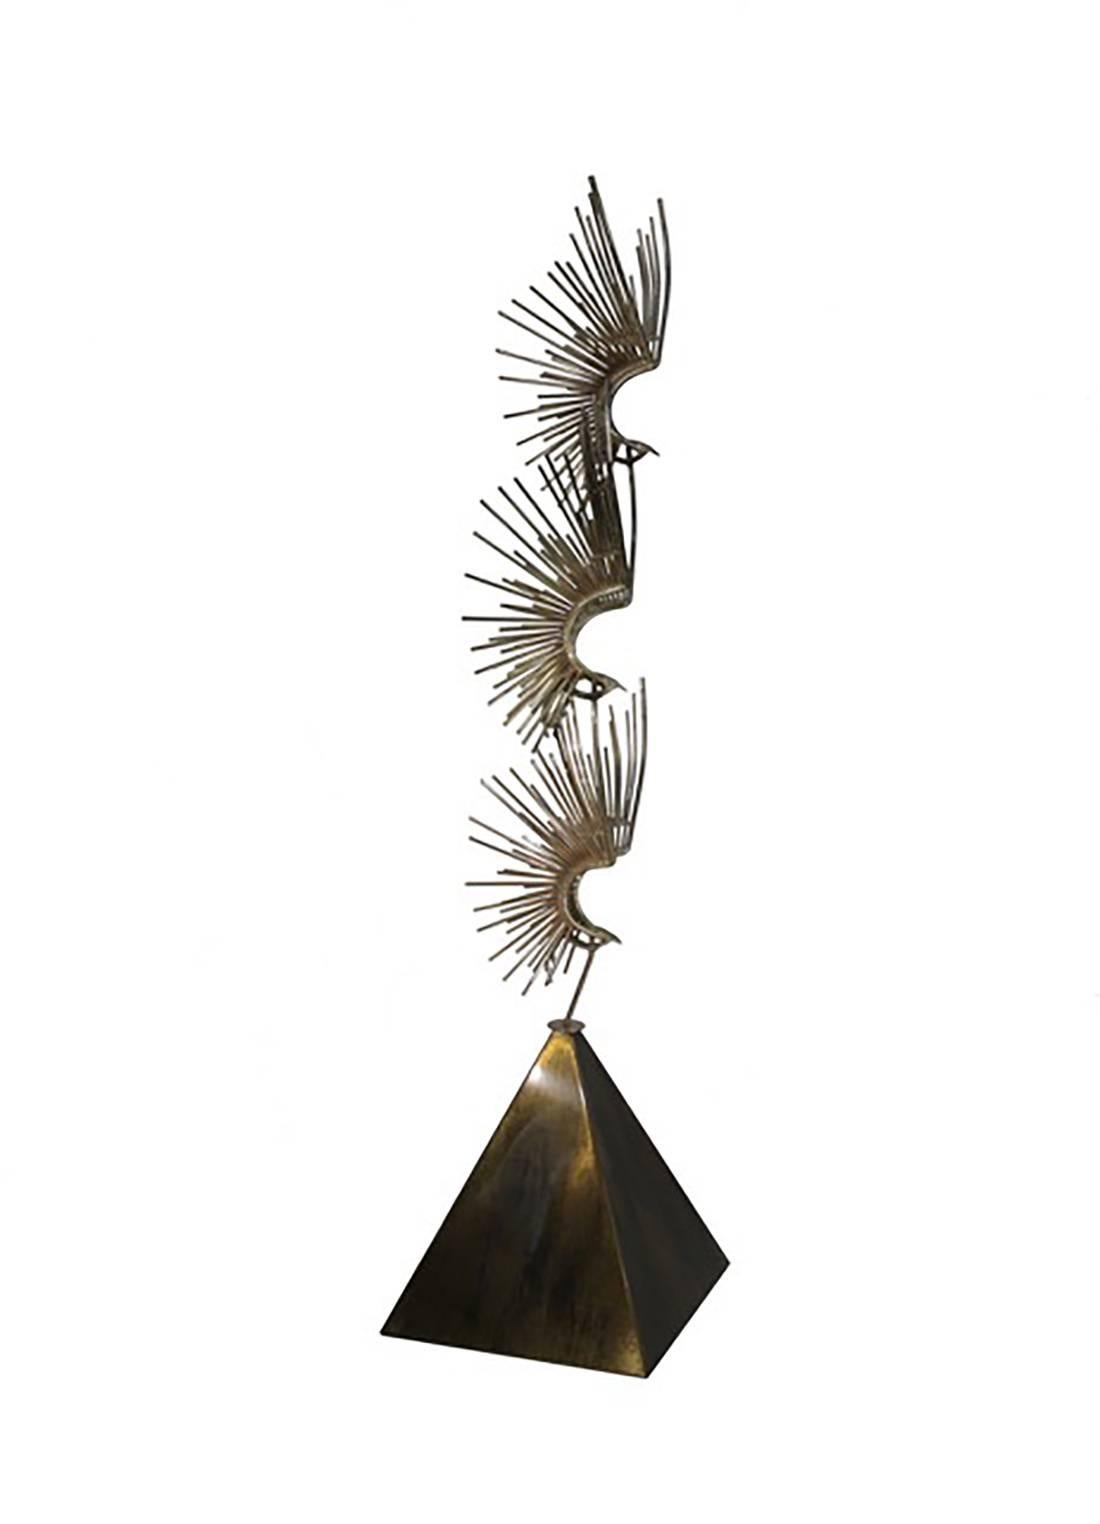 North American Curtis Jeré Sculpture of Eagles in Flight